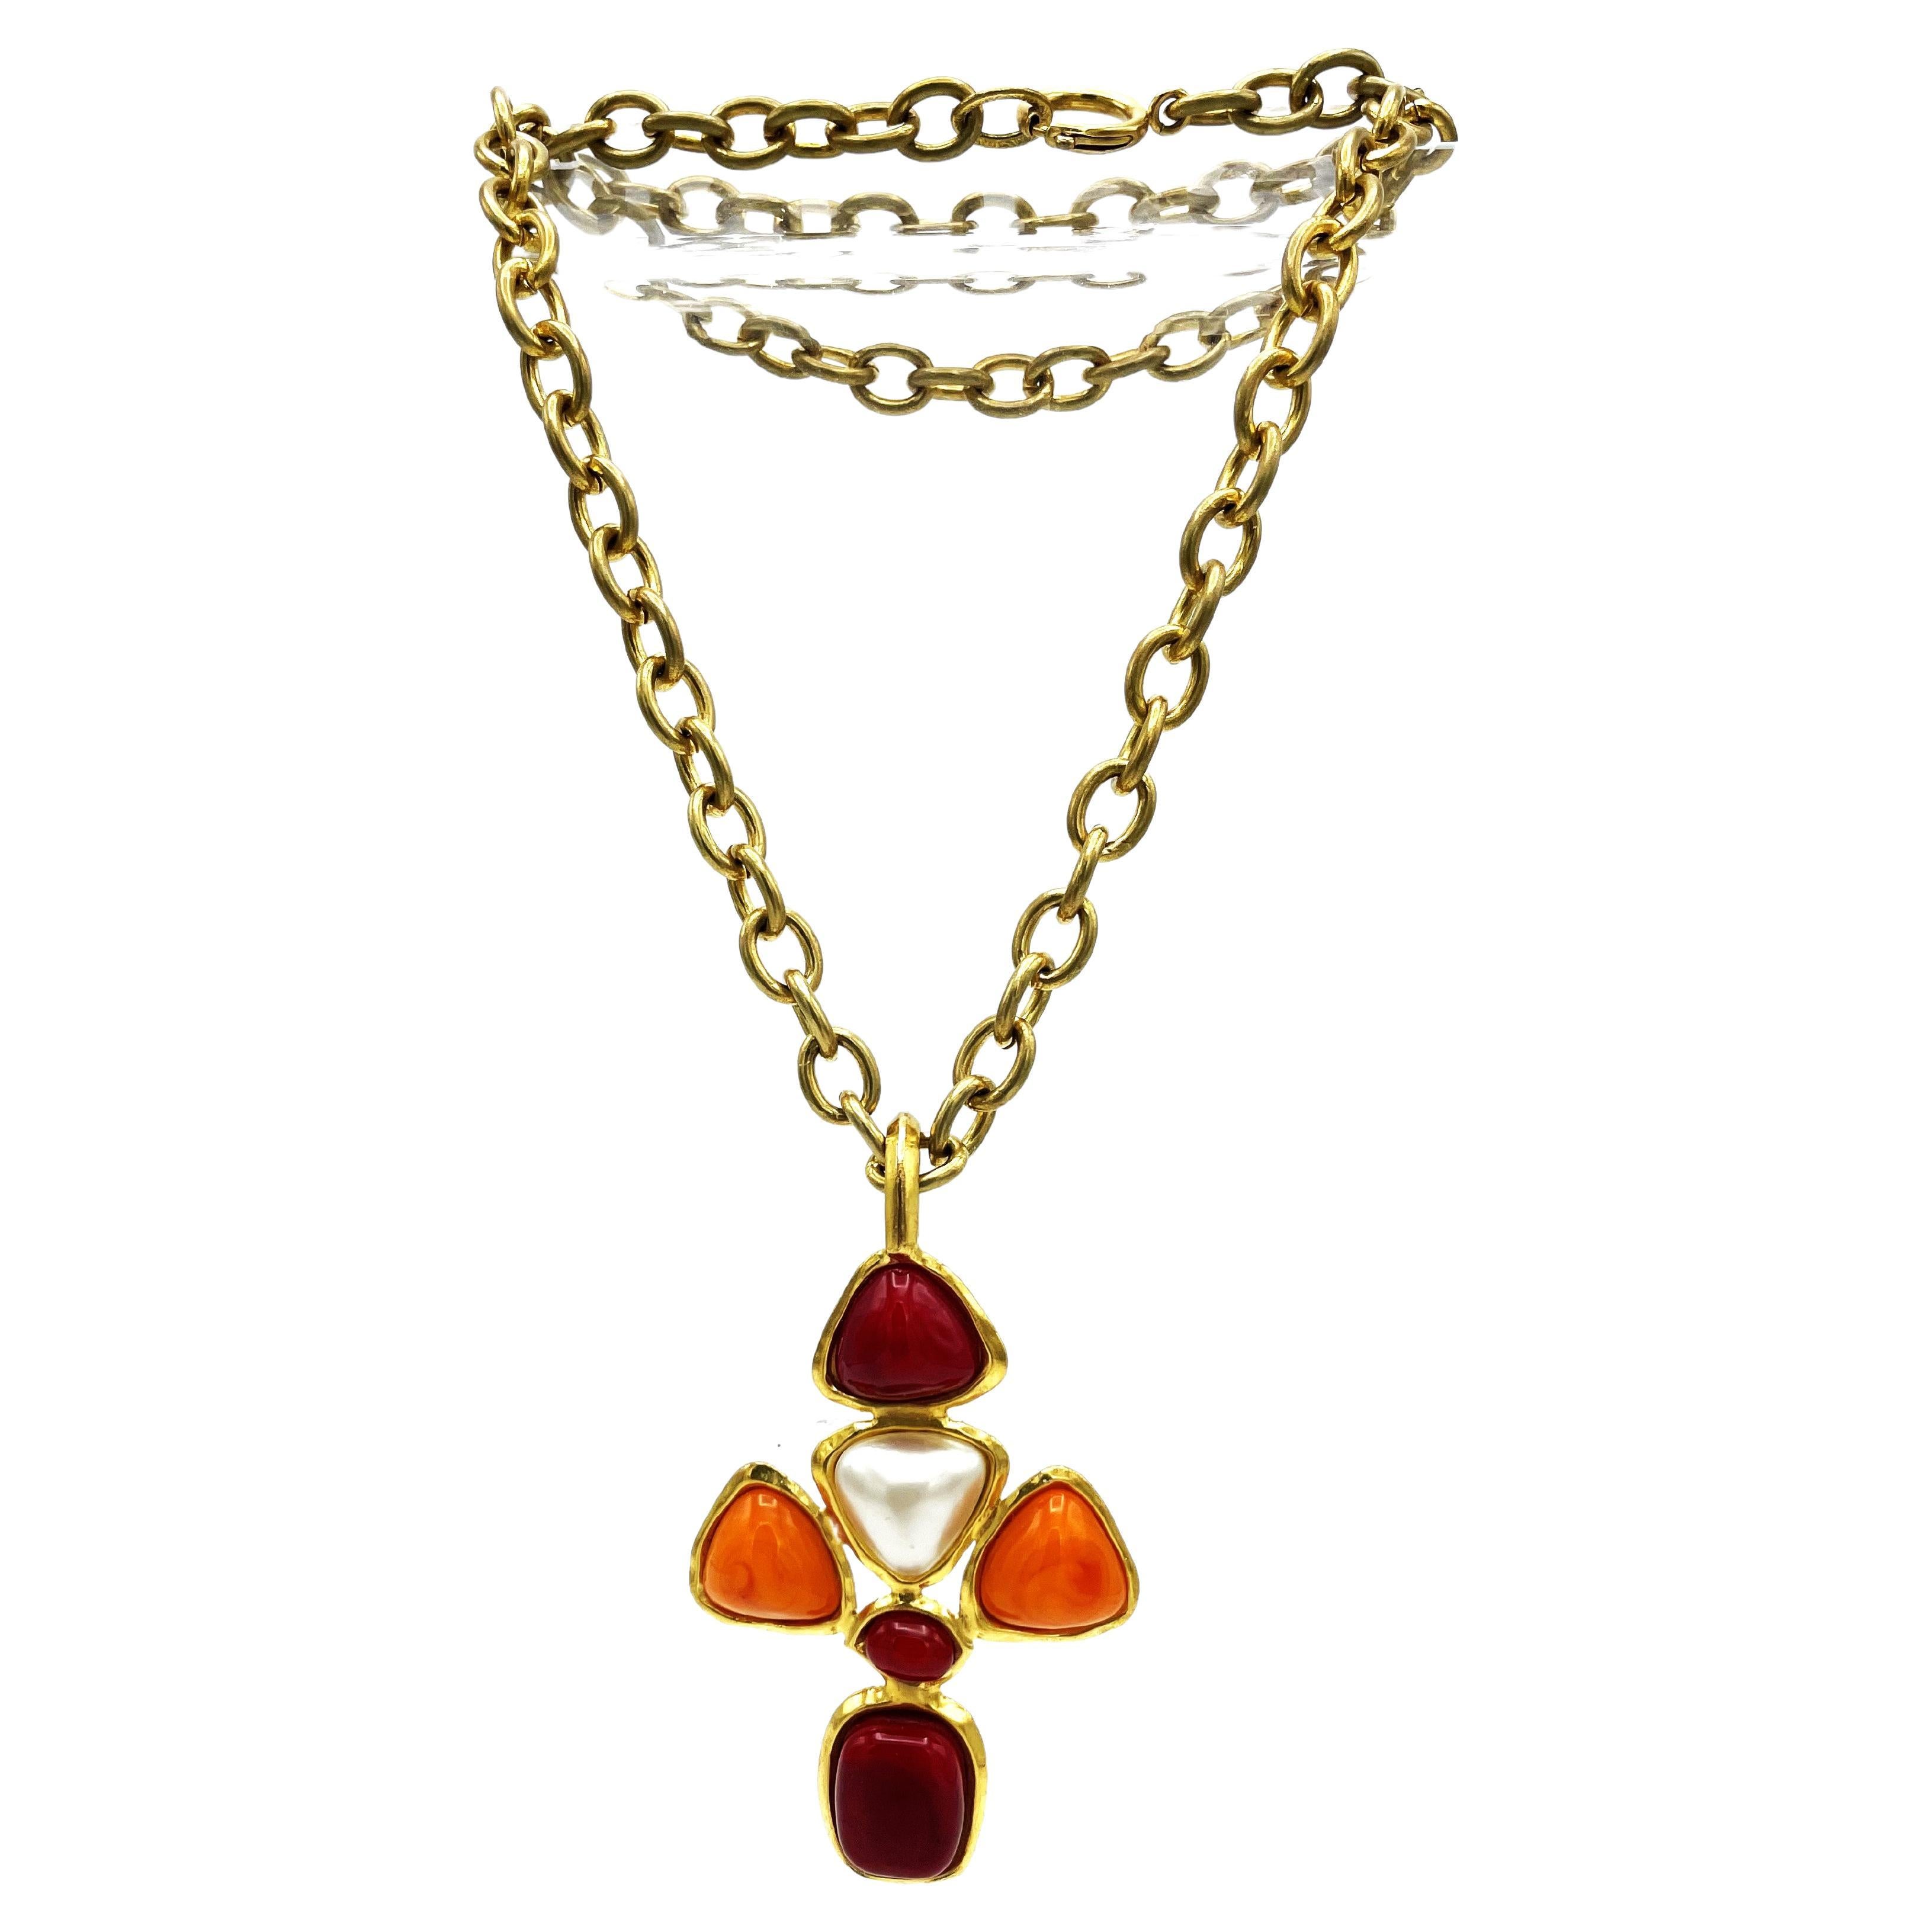 
Chanel necklace with an attached cross in the colors orange and red with handcrafted pearl, hanging from the original  70 cm long chain. Signed on the back side 93 CC P - Printemps = Spring.
Very good condition, the cross is 24 karat gold